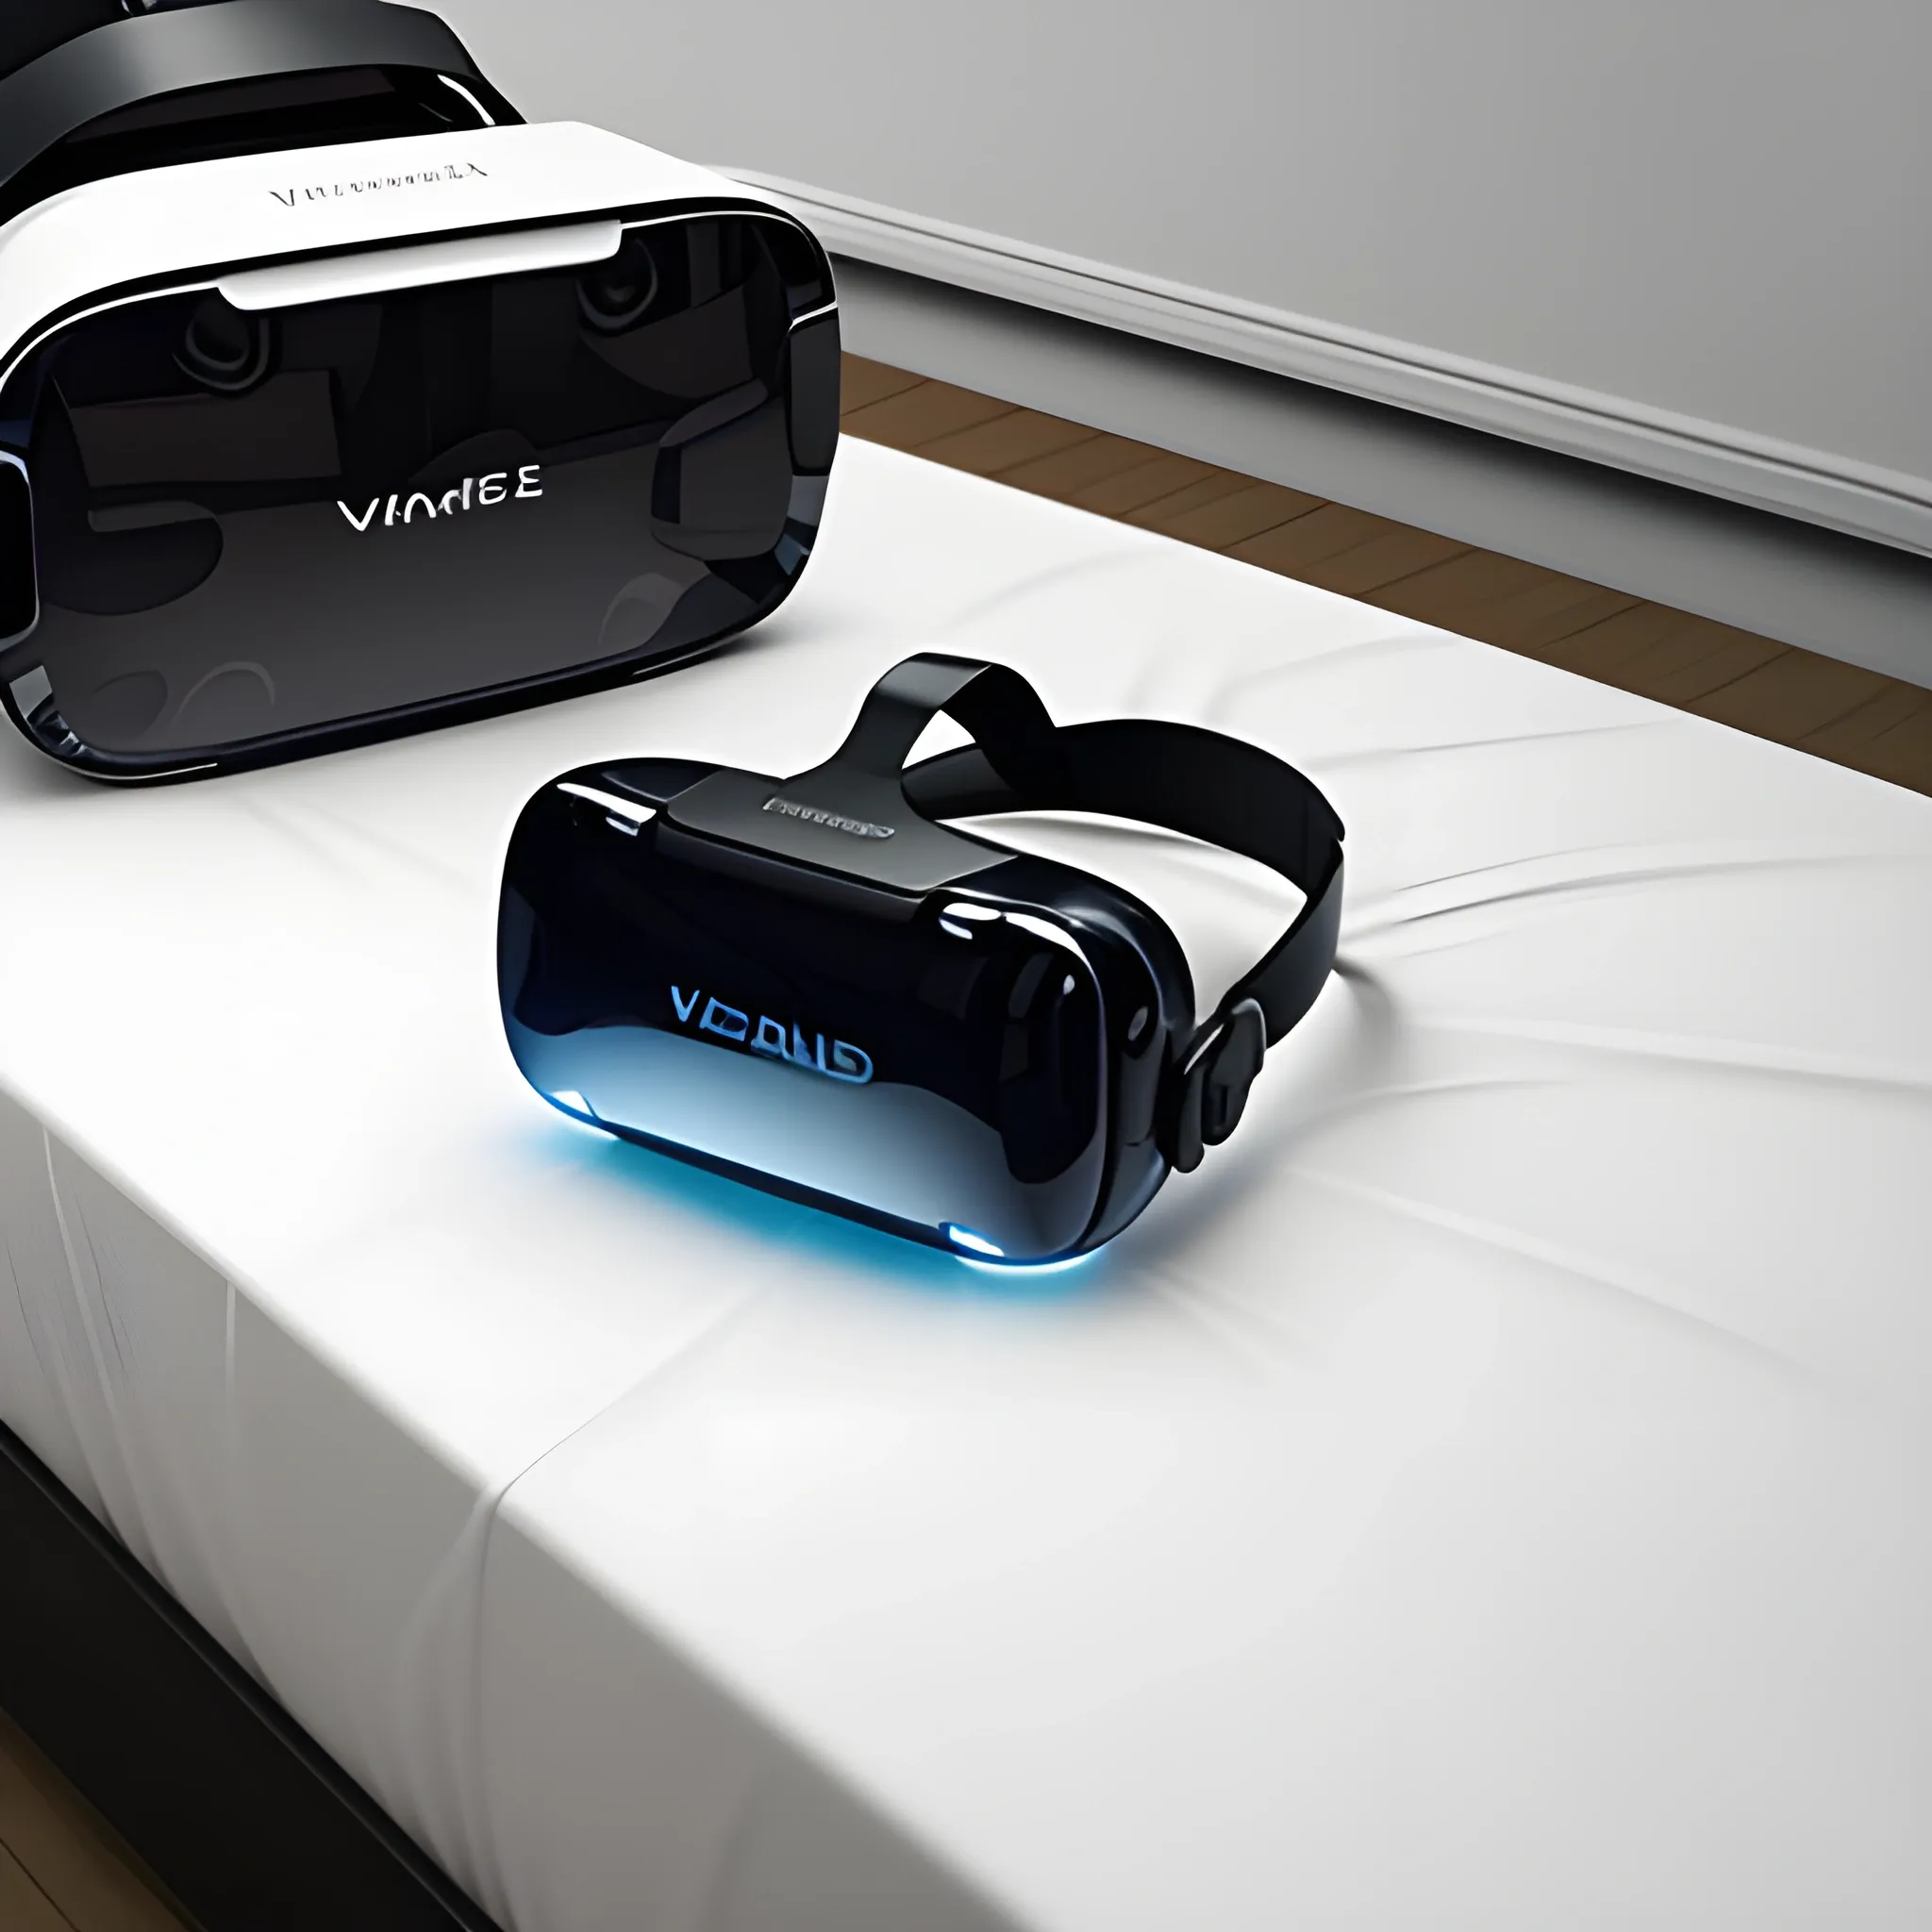 virtual reality headsets, on top of a bed, make it look like a game